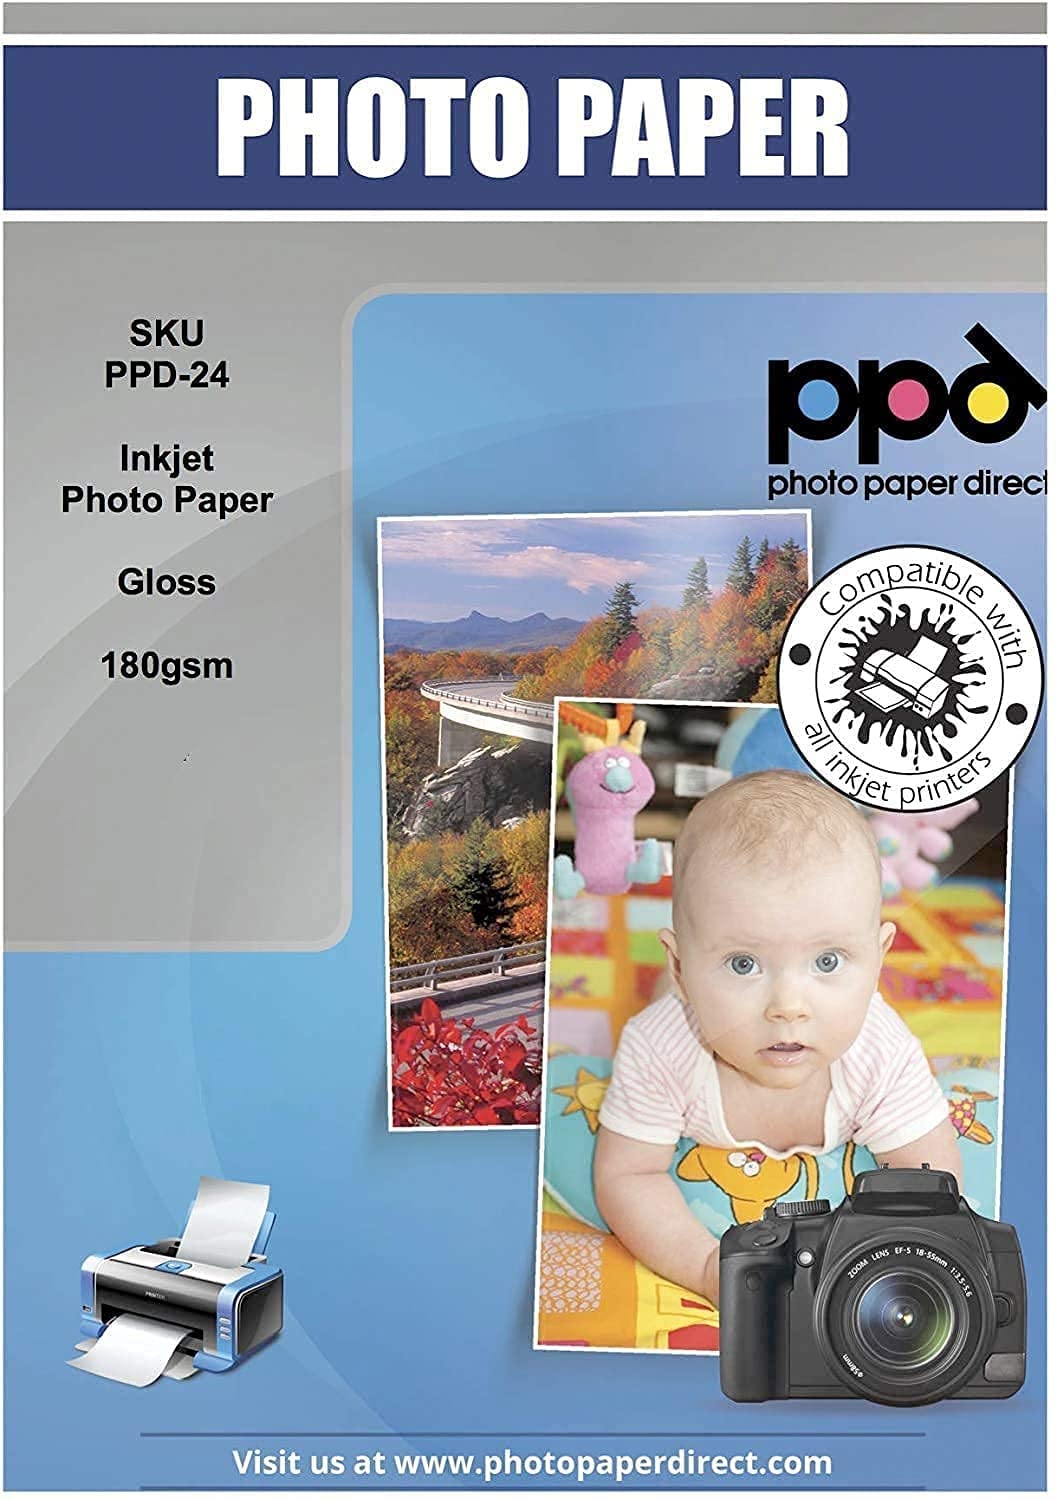 PPD Inkjet Photo Paper Glossy 49lb. 180gsm 9.9mil A4 PPD-24